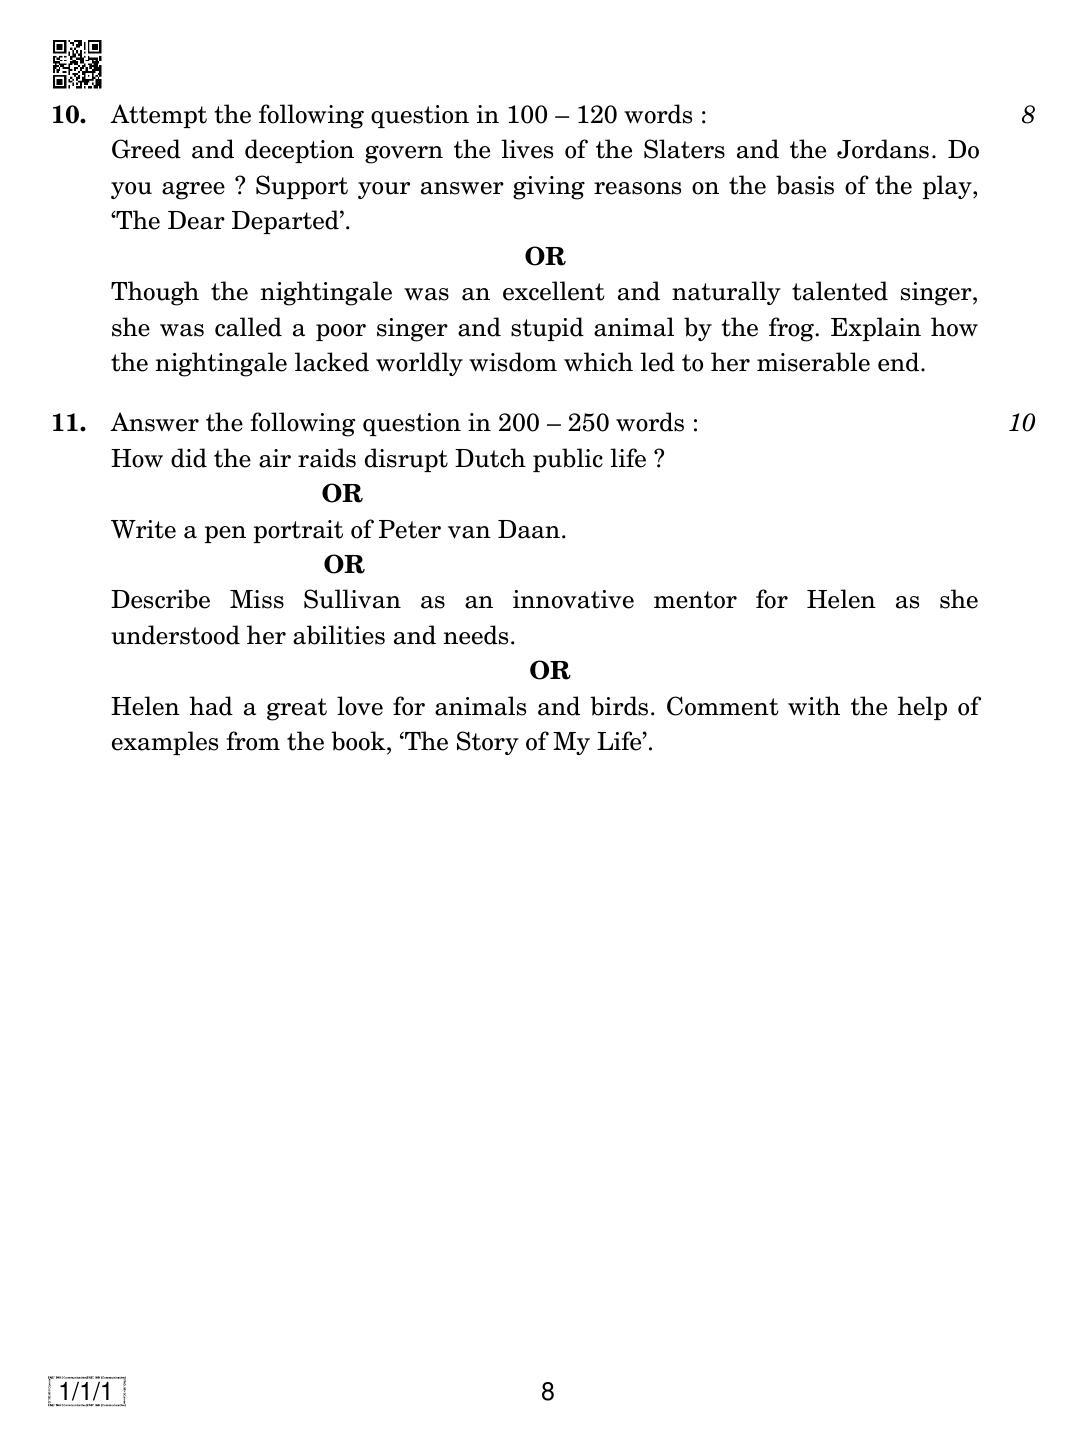 CBSE Class 10 1-1-1 ENGLISH COMM. 2019 Compartment Question Paper - Page 8